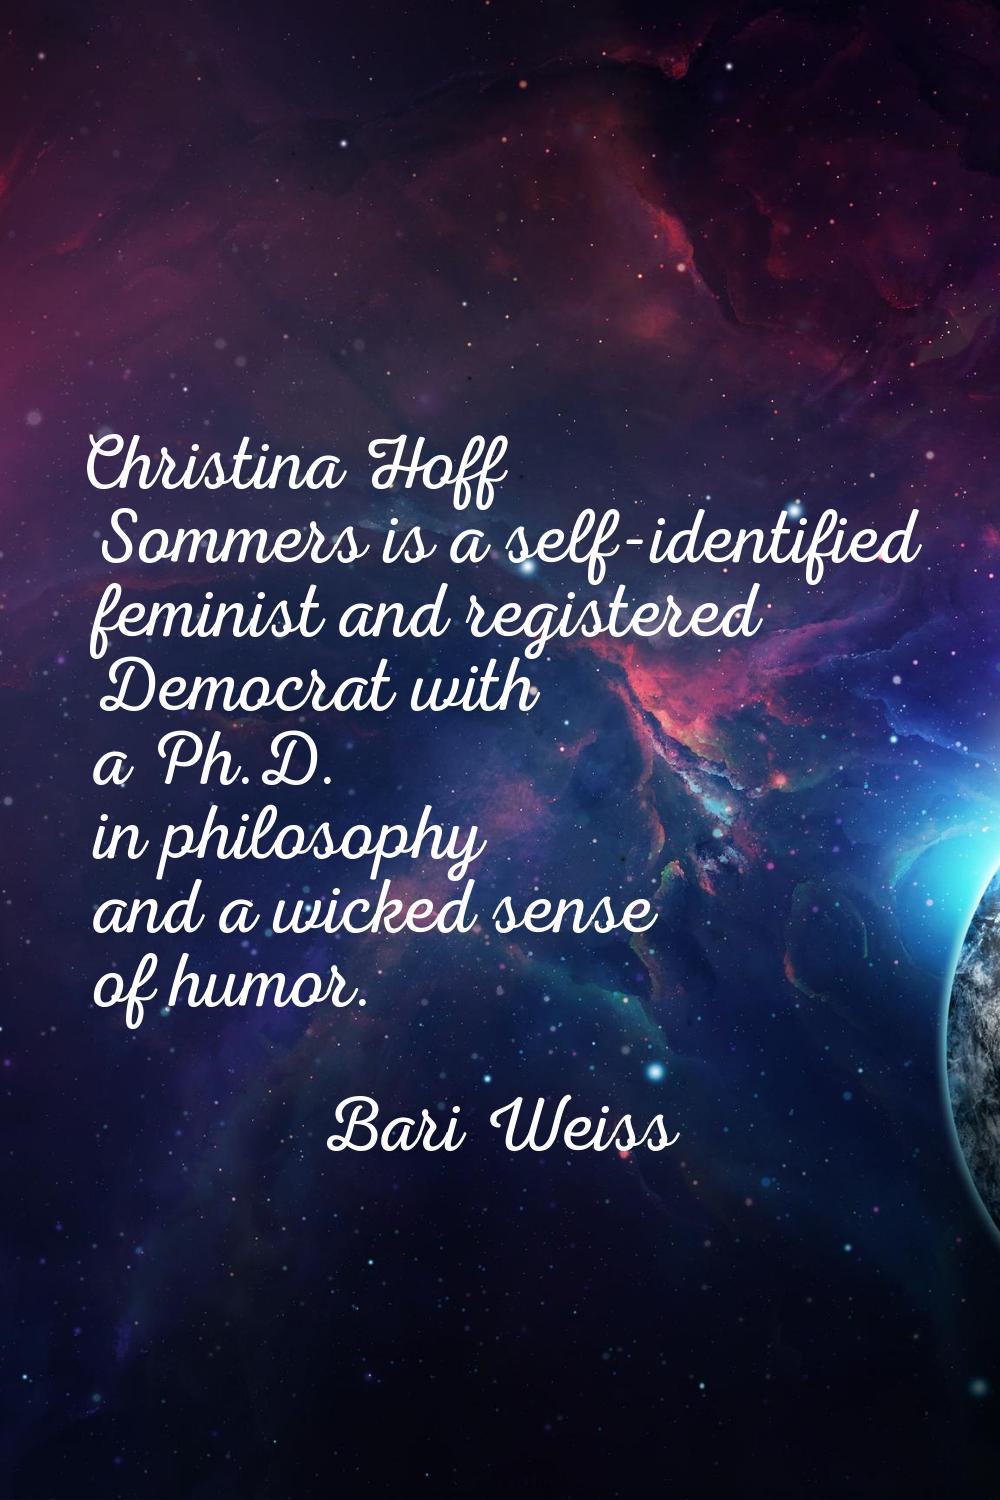 Christina Hoff Sommers is a self-identified feminist and registered Democrat with a Ph.D. in philos